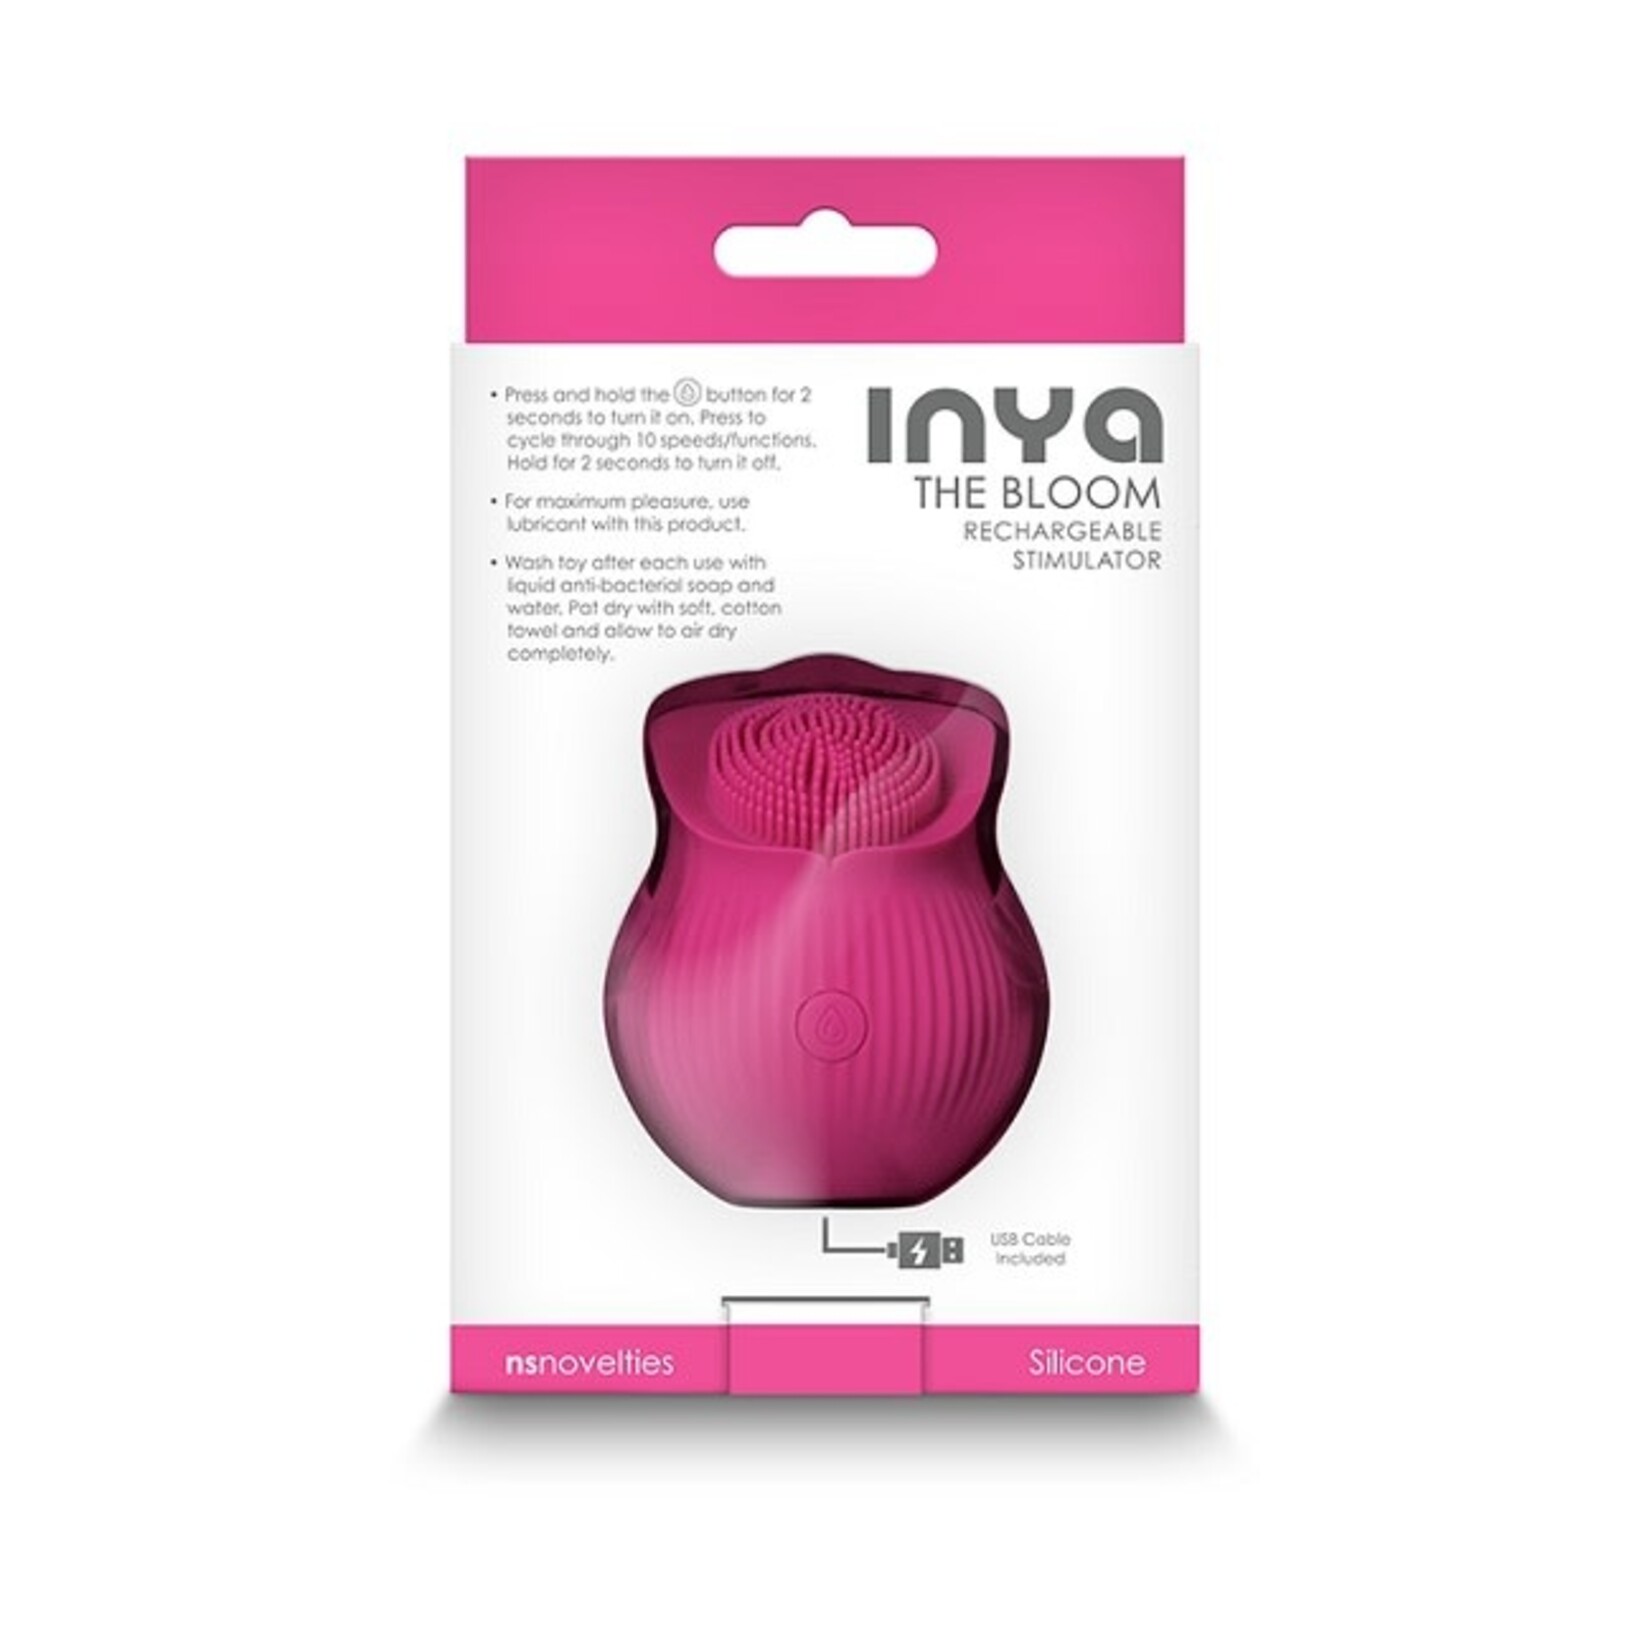 NS Novelties Inya The Bloom Rechargeable Stimulator